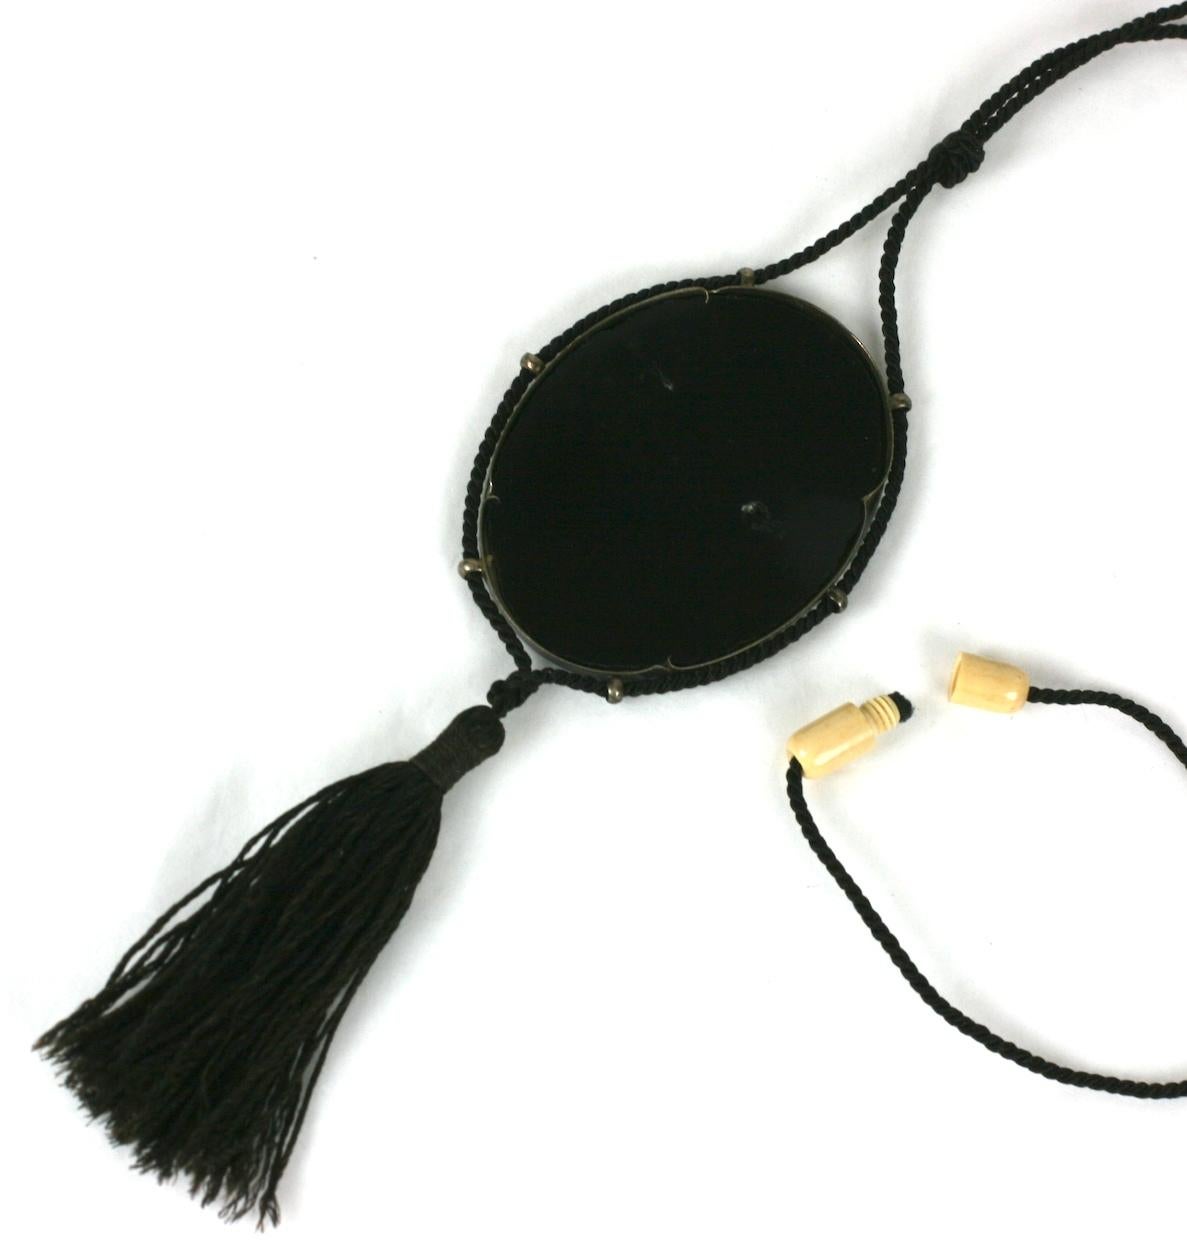 French Art Deco Japonesque Pendant Necklace of finely carved faux ivory colored celluloid backed by an oval panel of black bakelite. Set in a silvered metal frame with six round loops, suspended with a silk cord with decorative tassel.
Barrel clasp